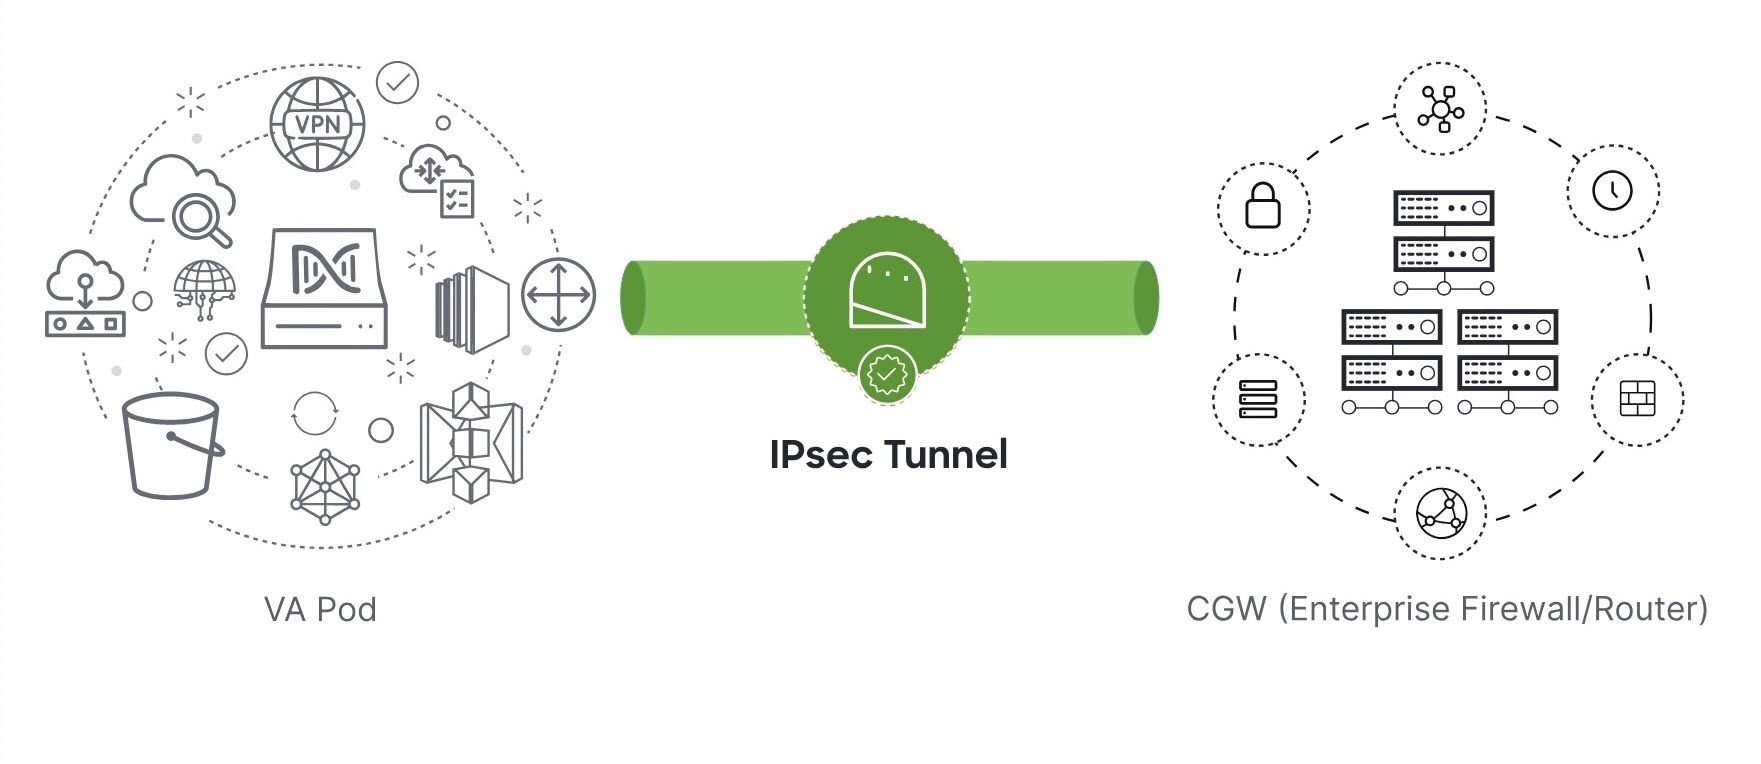 The IPsec tunnel connecting the VA pod and enterprise firewall or router is green, meaning the tunnel is up.